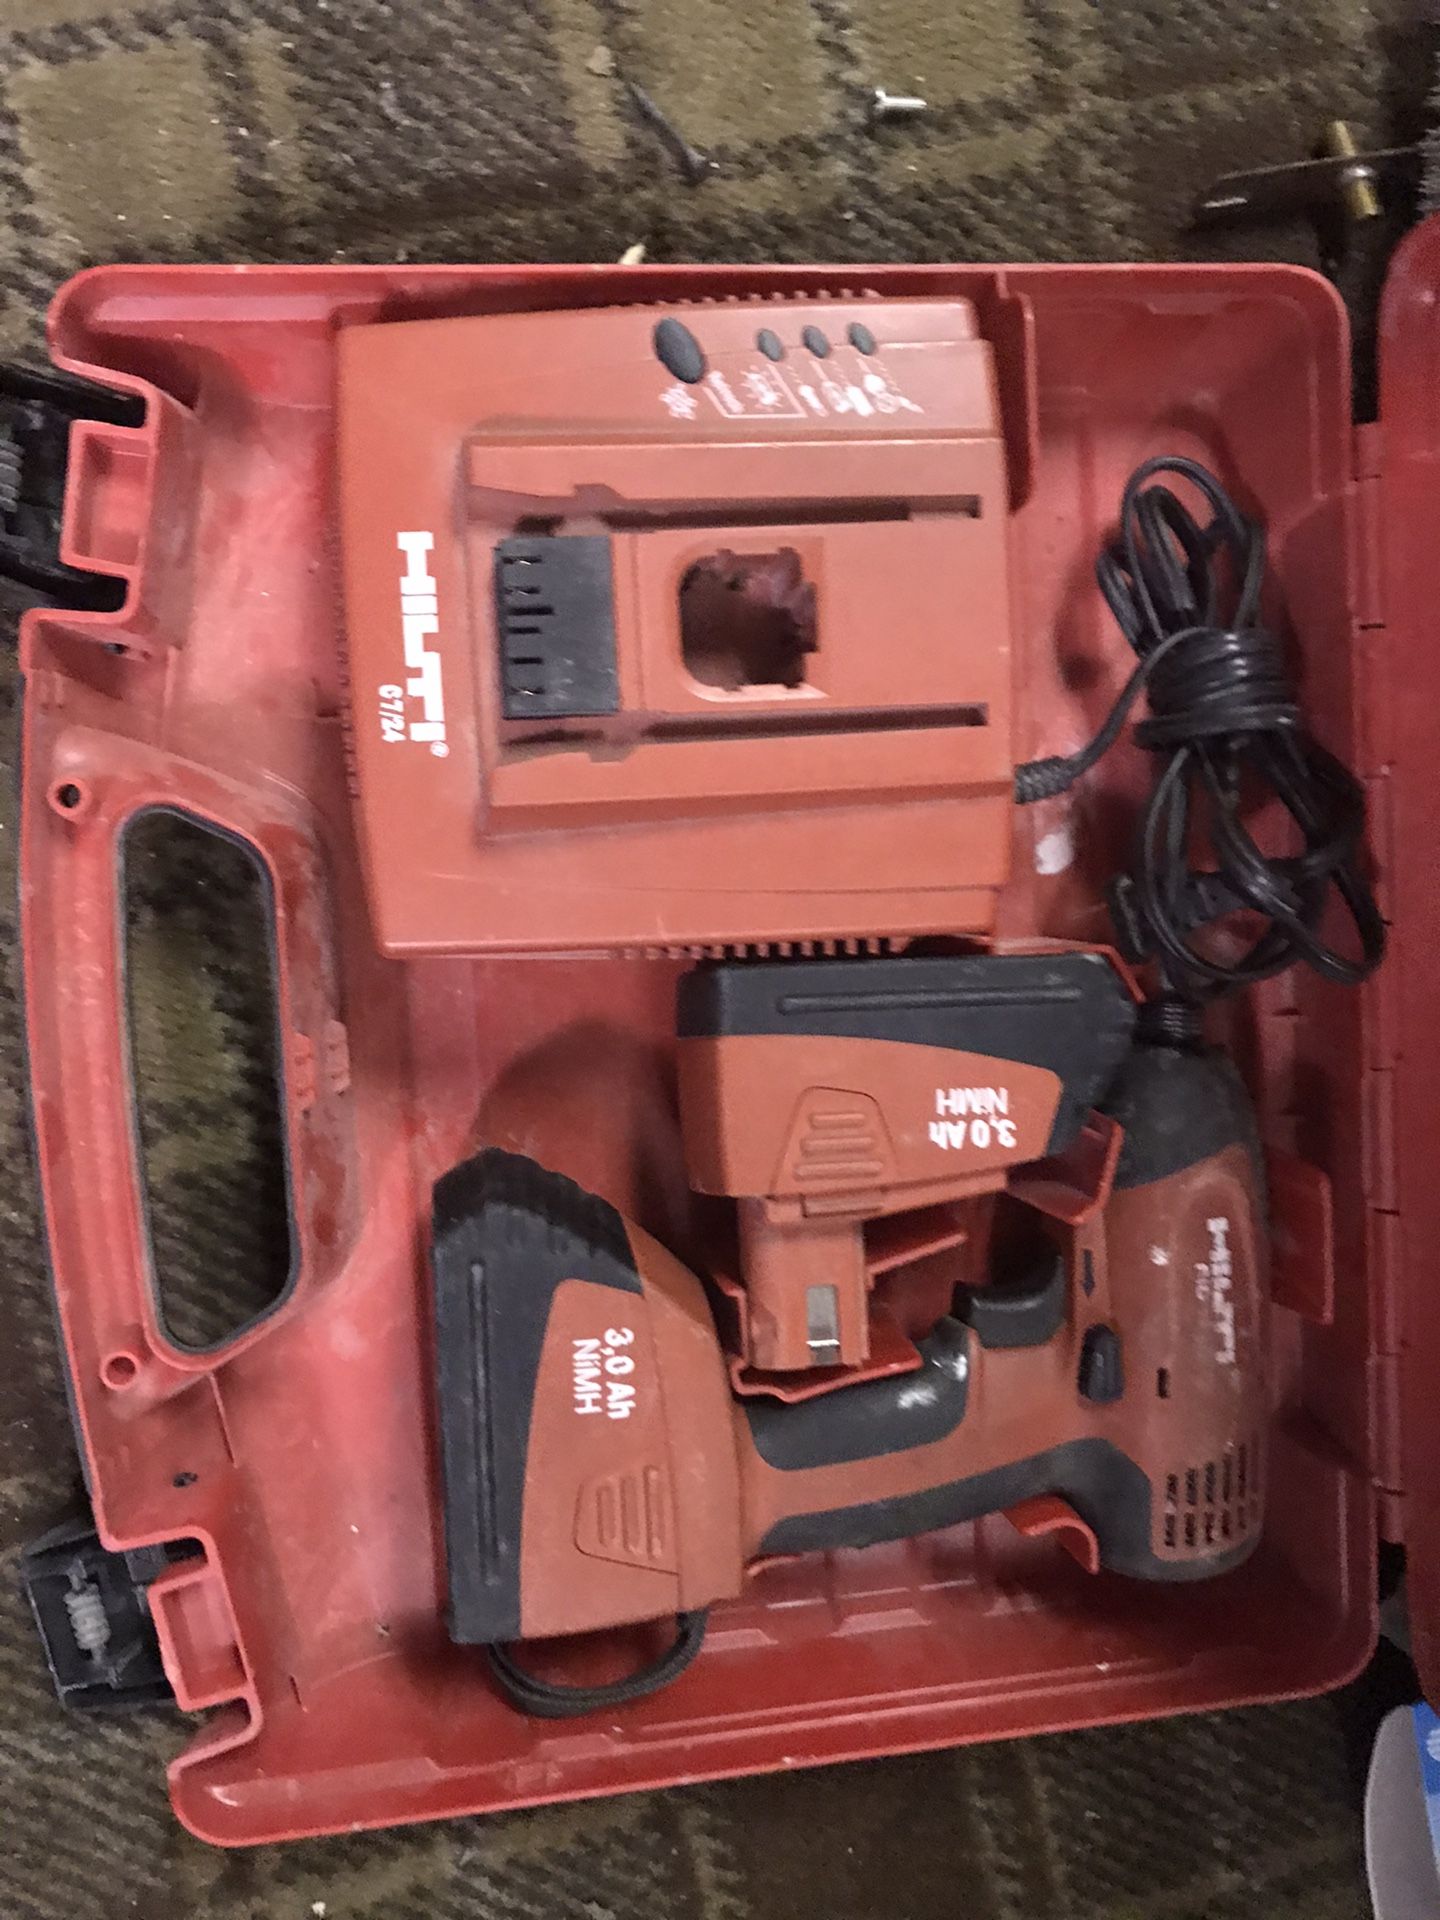 Hilti Impact drill with two battery